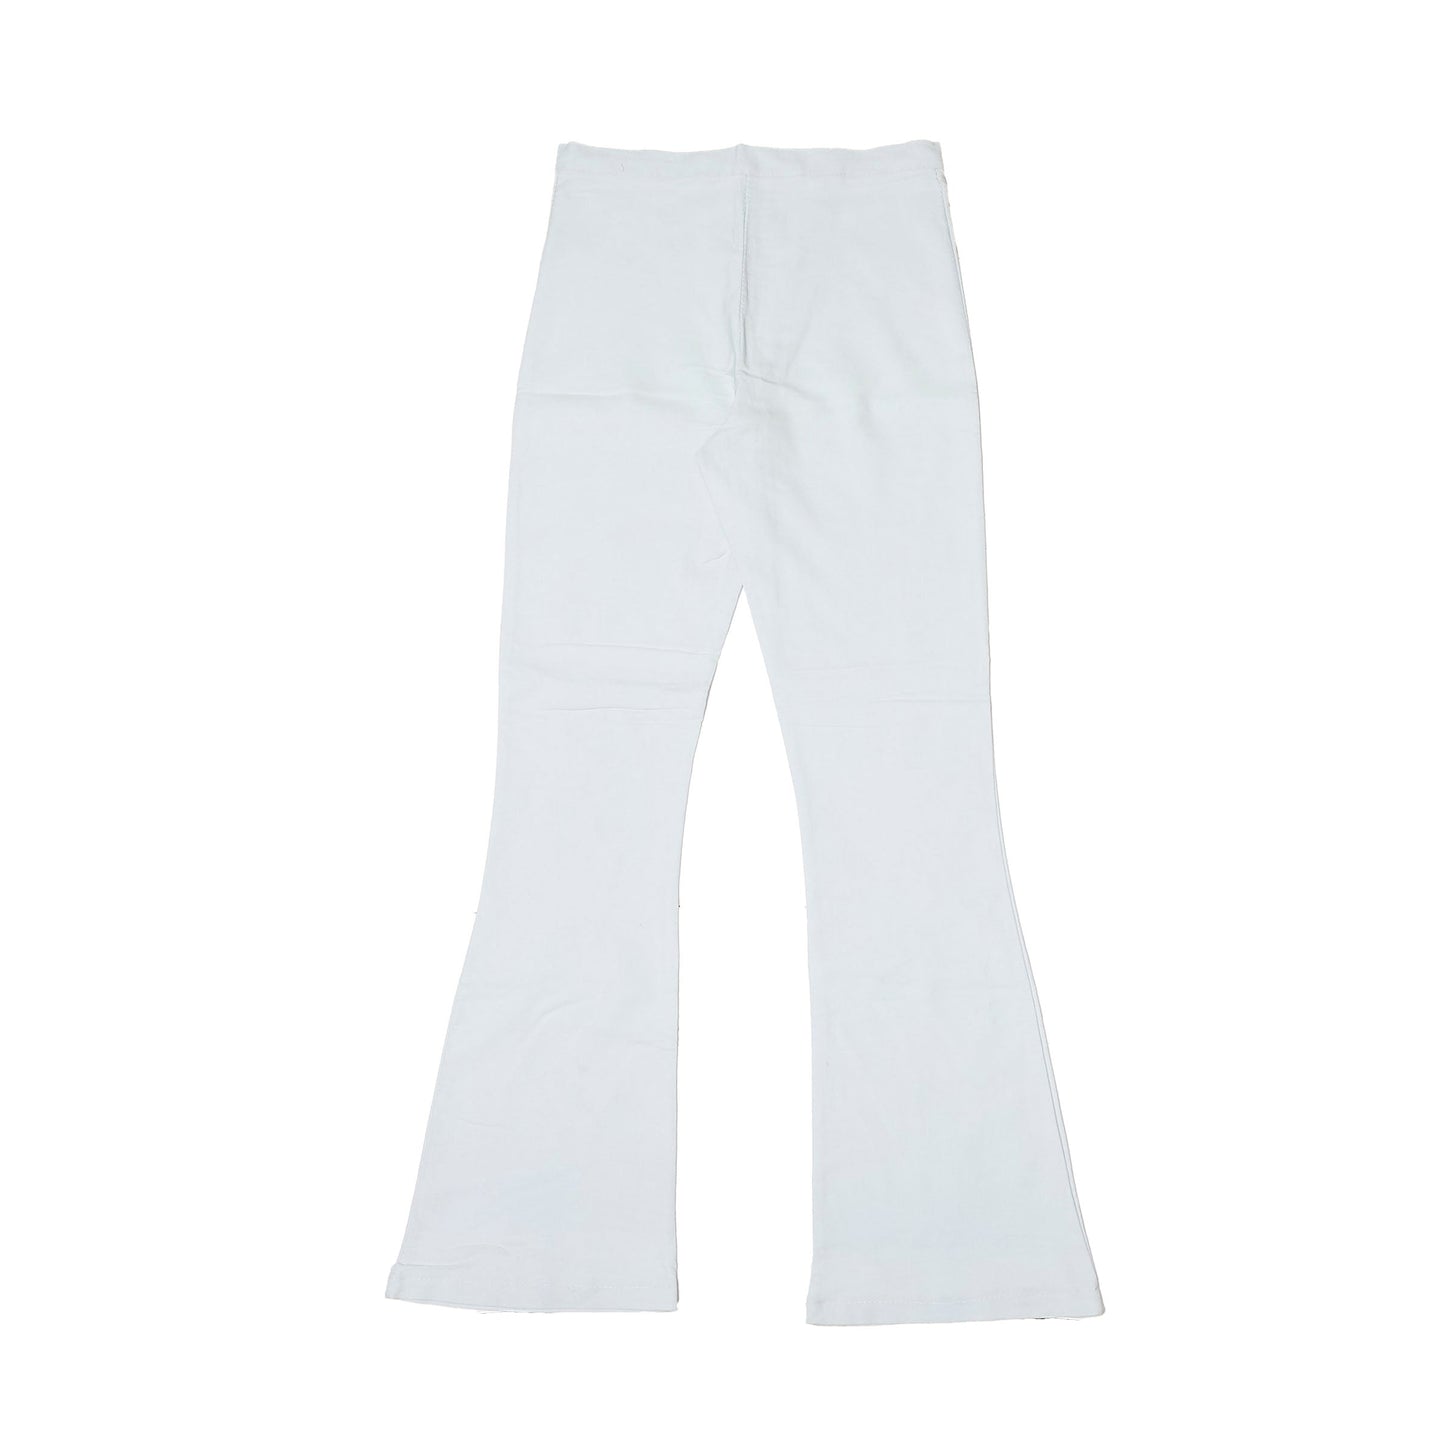 High Waisted Slim Fit Trousers - UK 8